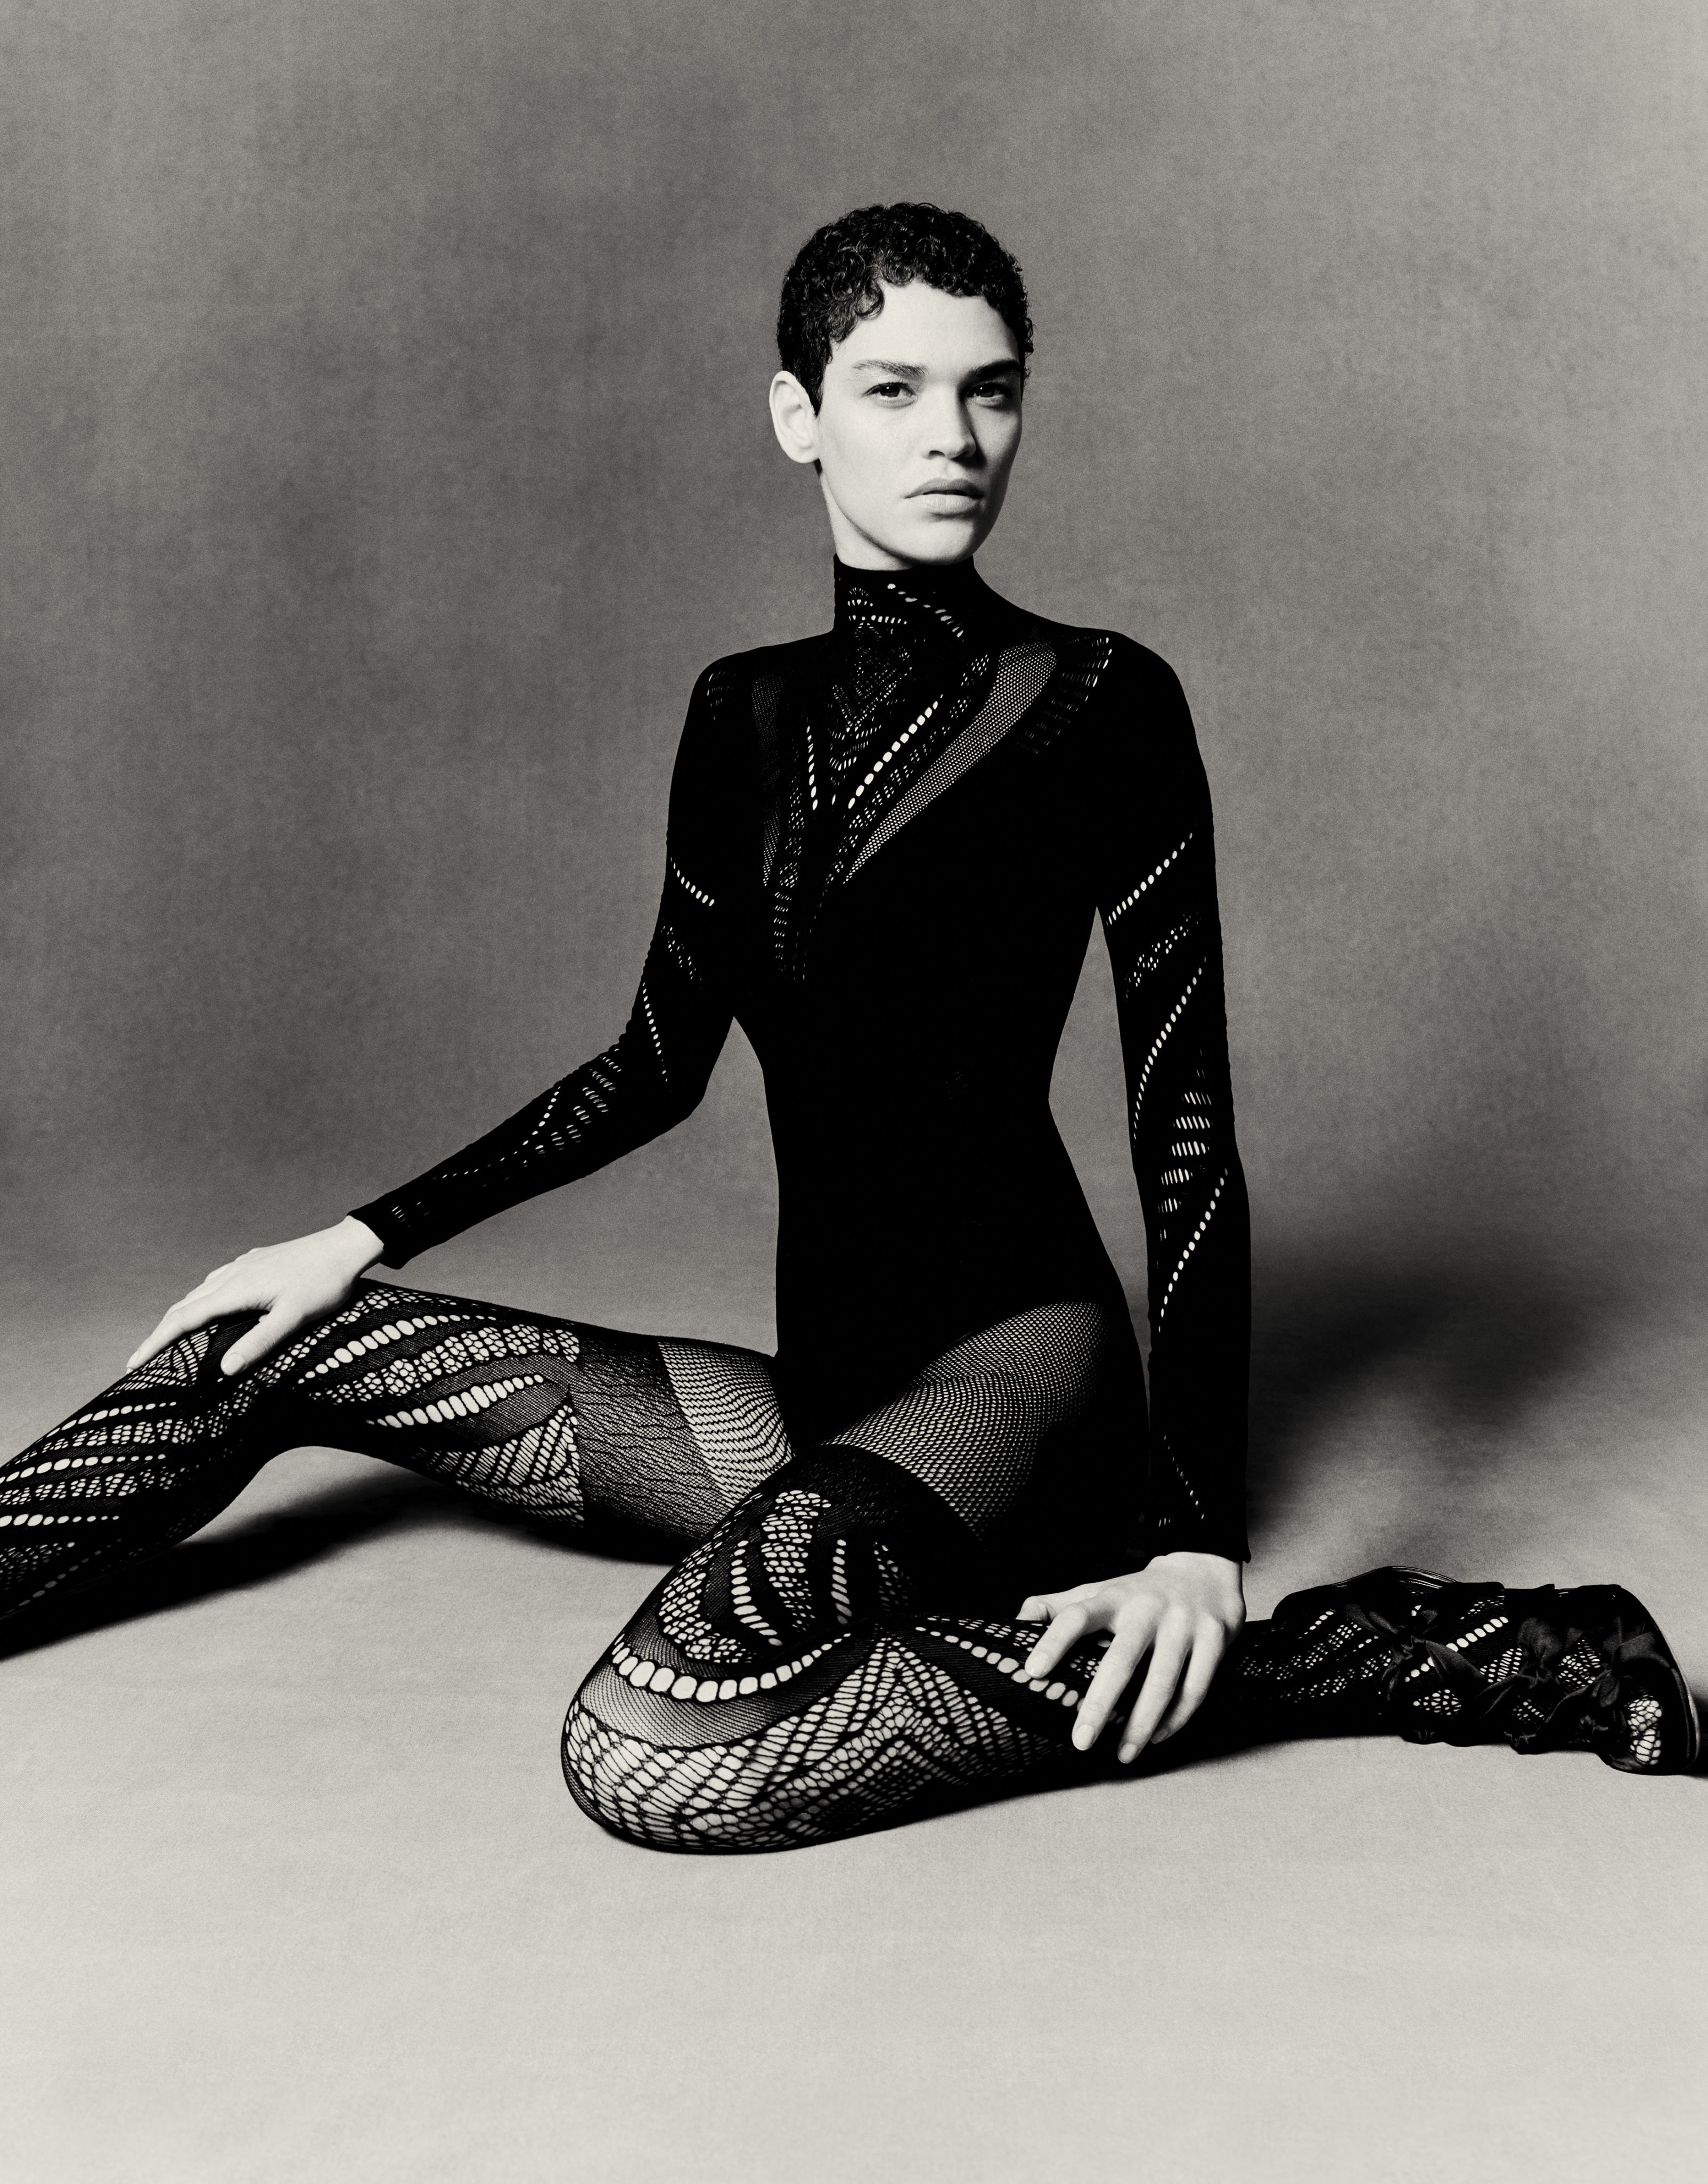 Alberta Ferretti Collabs with Wolford + Other Fashion News